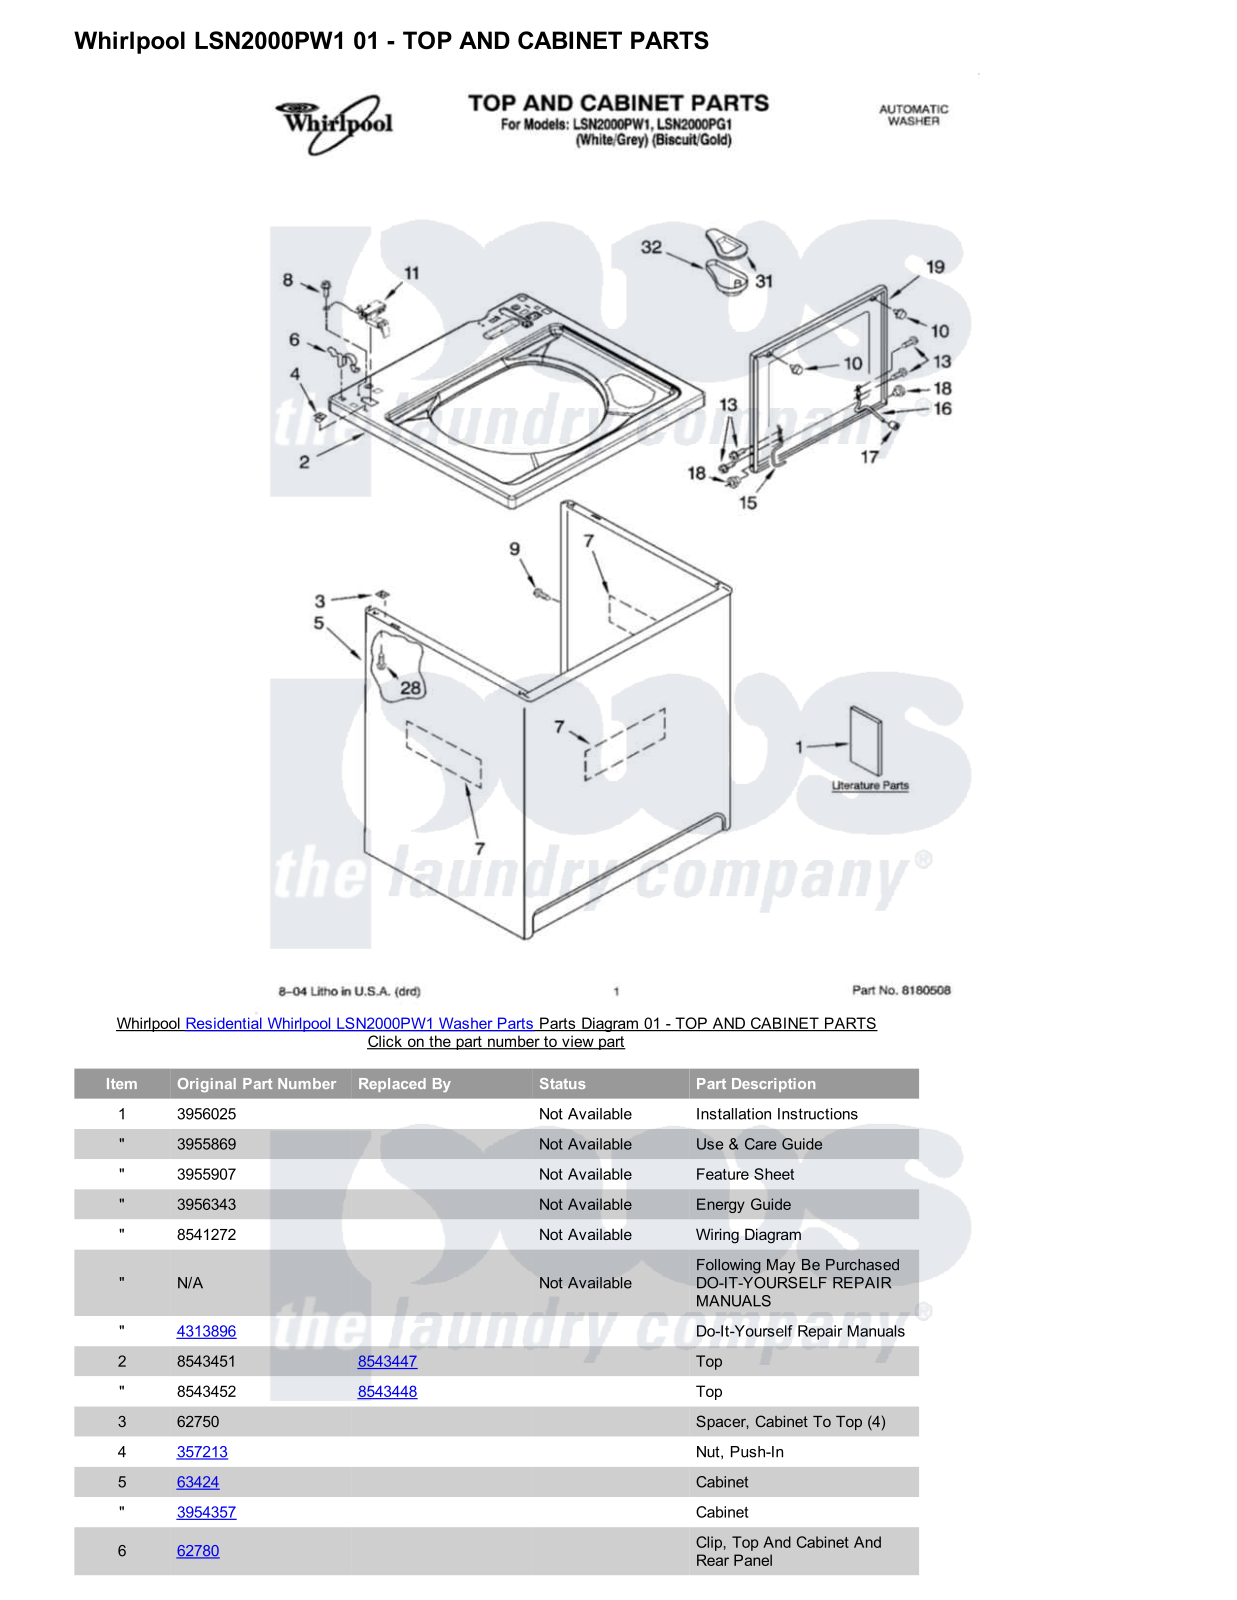 Whirlpool LSN2000PW1 Parts Diagram